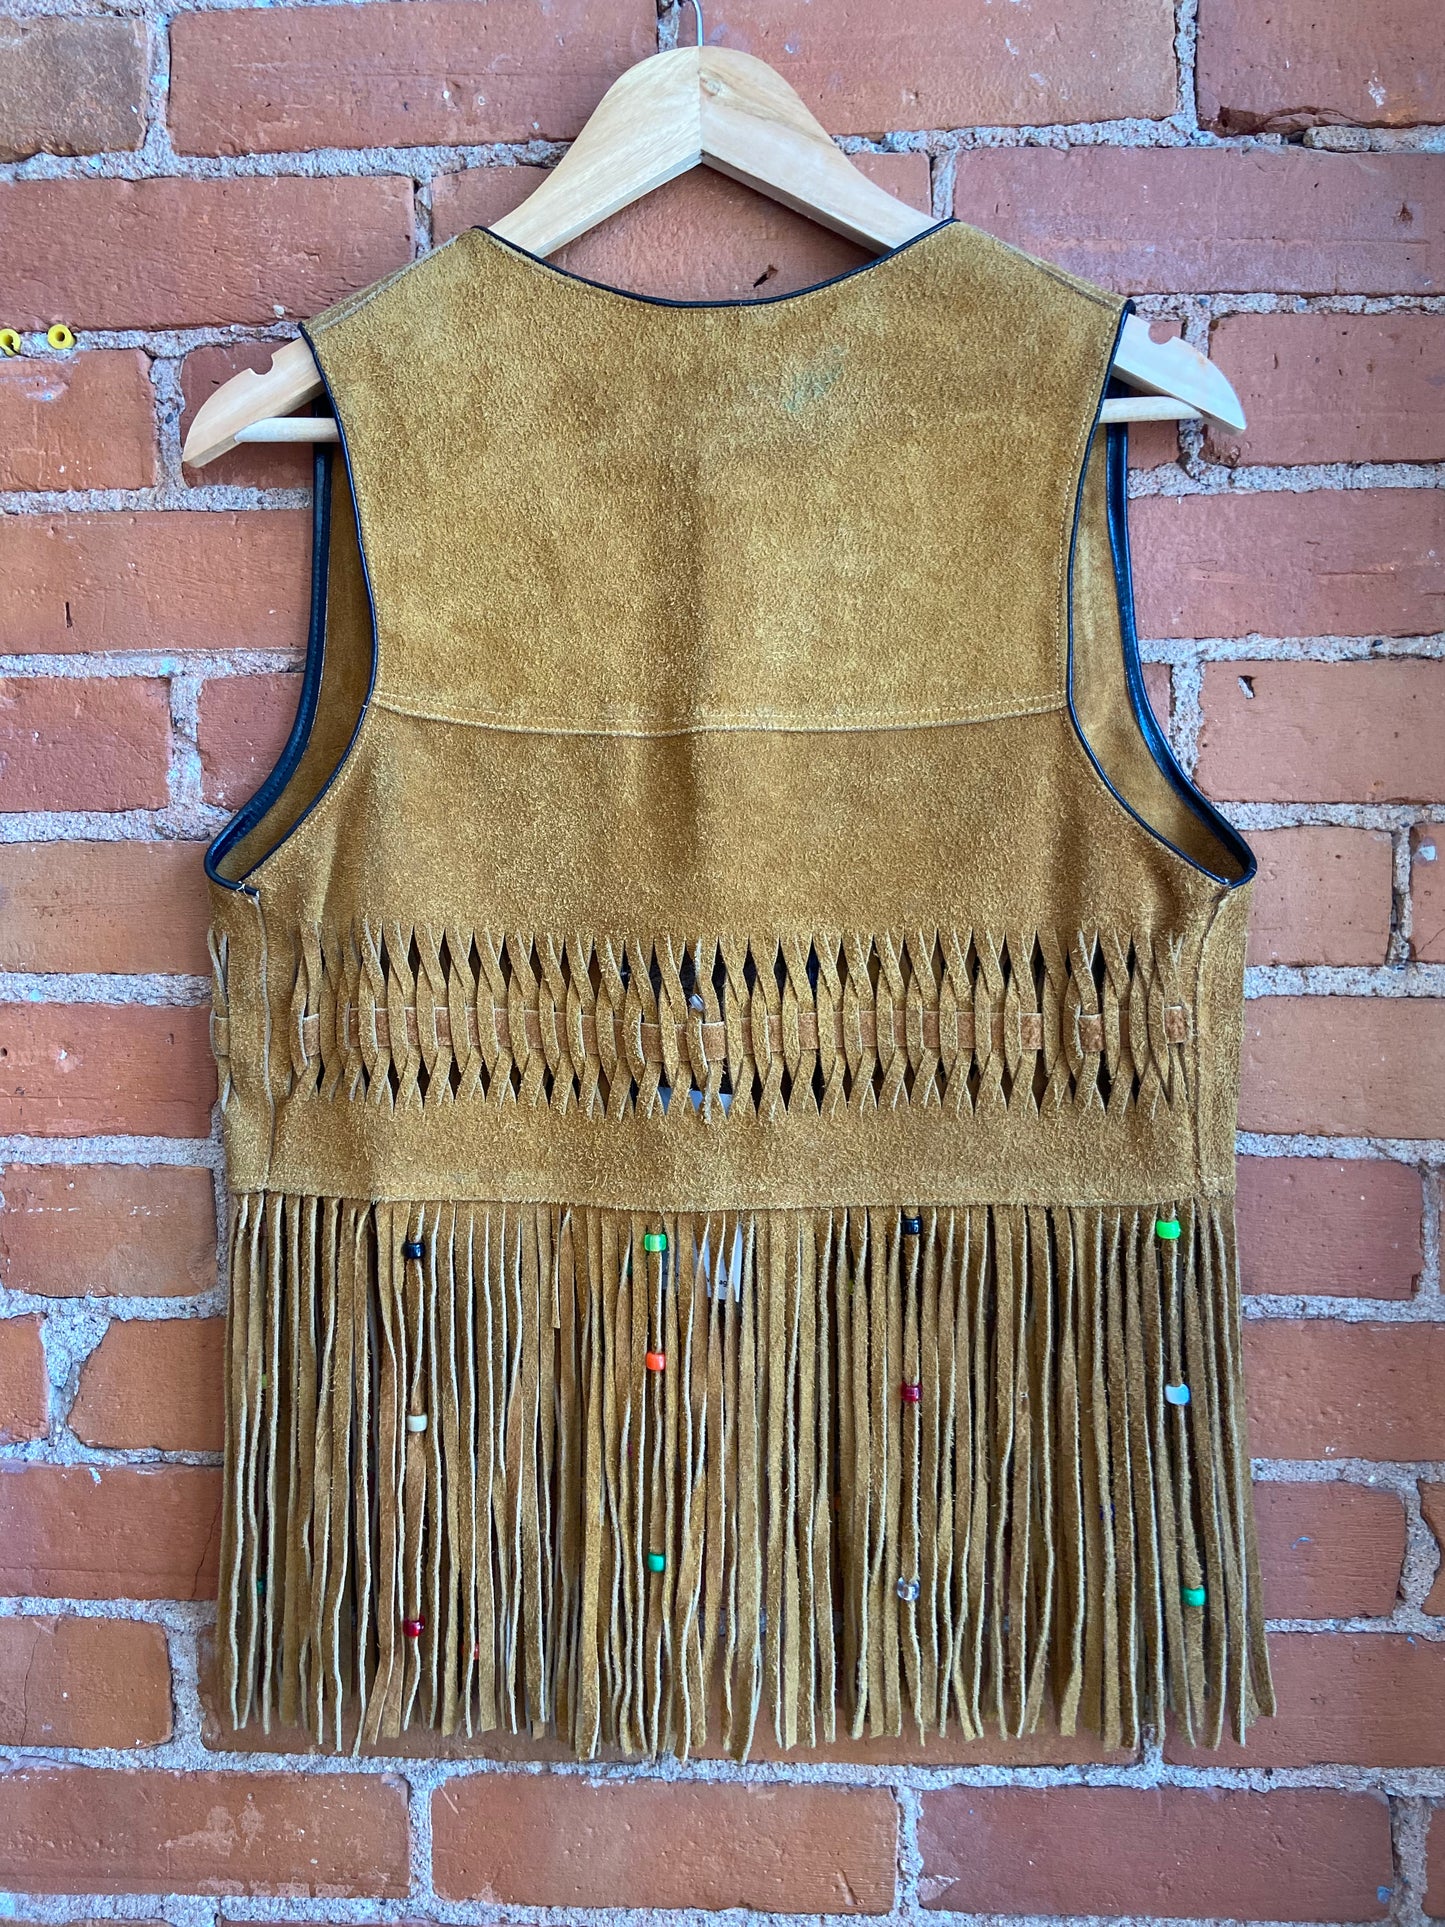 Suede Vest with Fringe & Beads